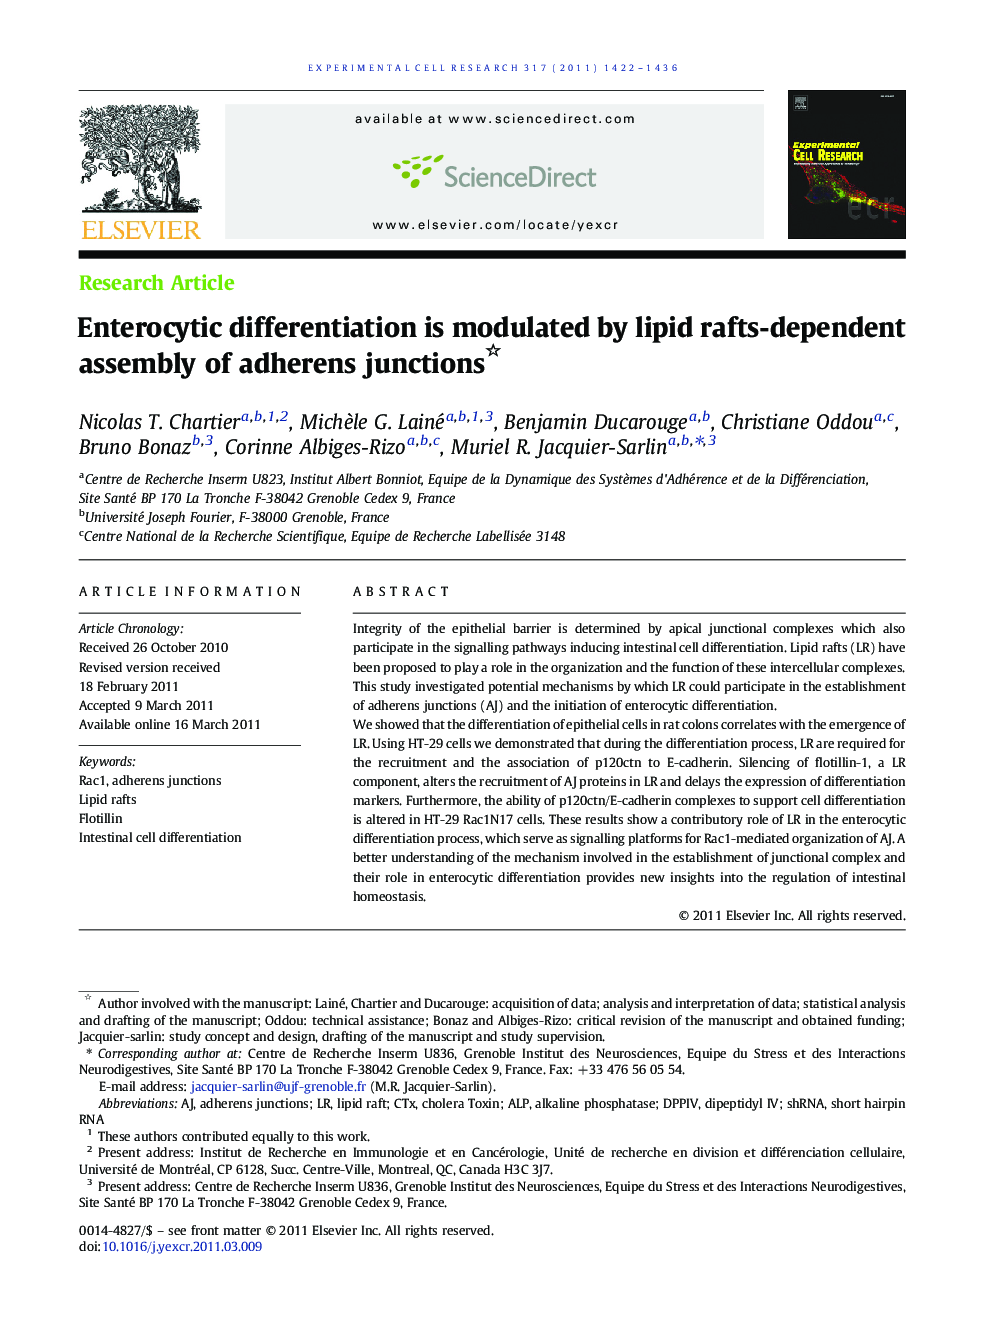 Enterocytic differentiation is modulated by lipid rafts-dependent assembly of adherens junctions 